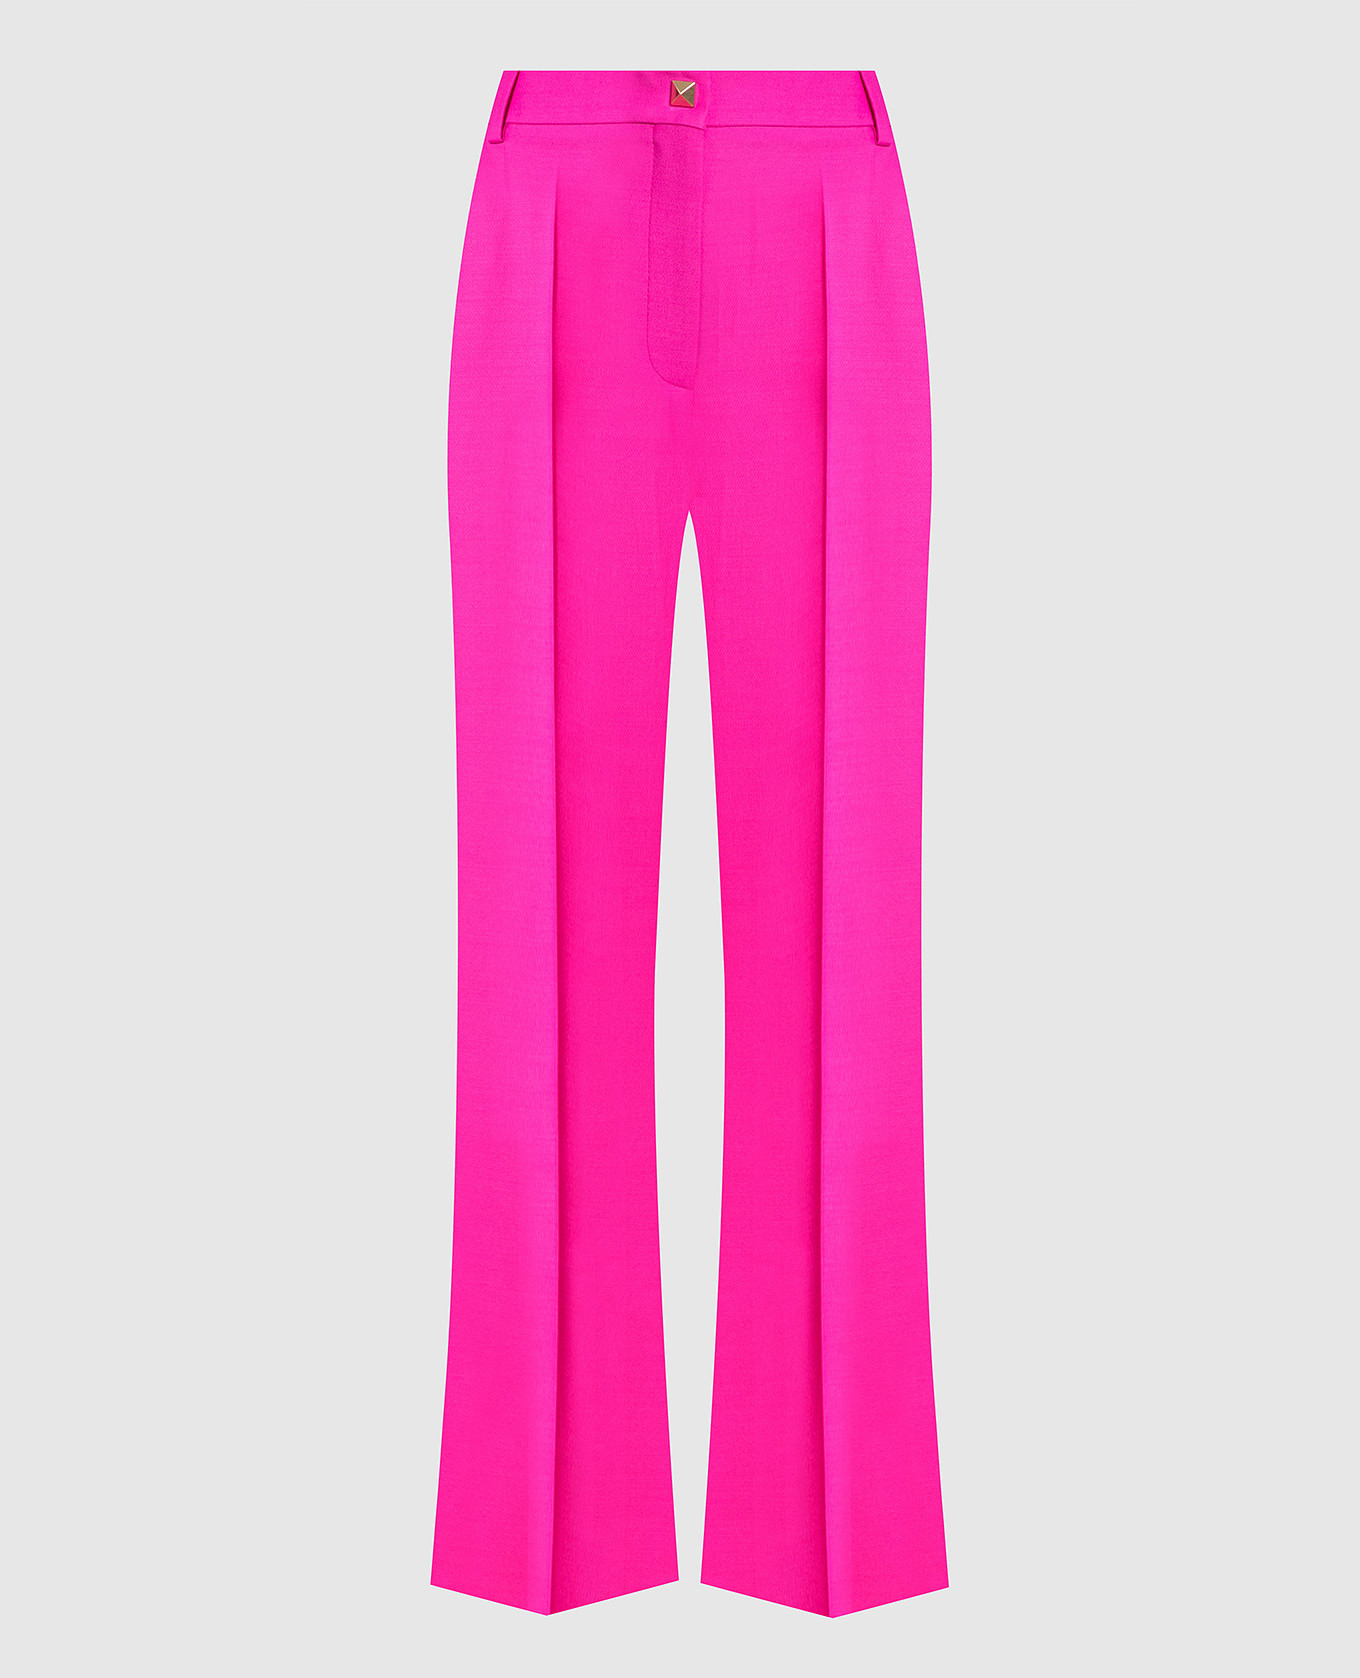 Pink flared pants made of wool and silk